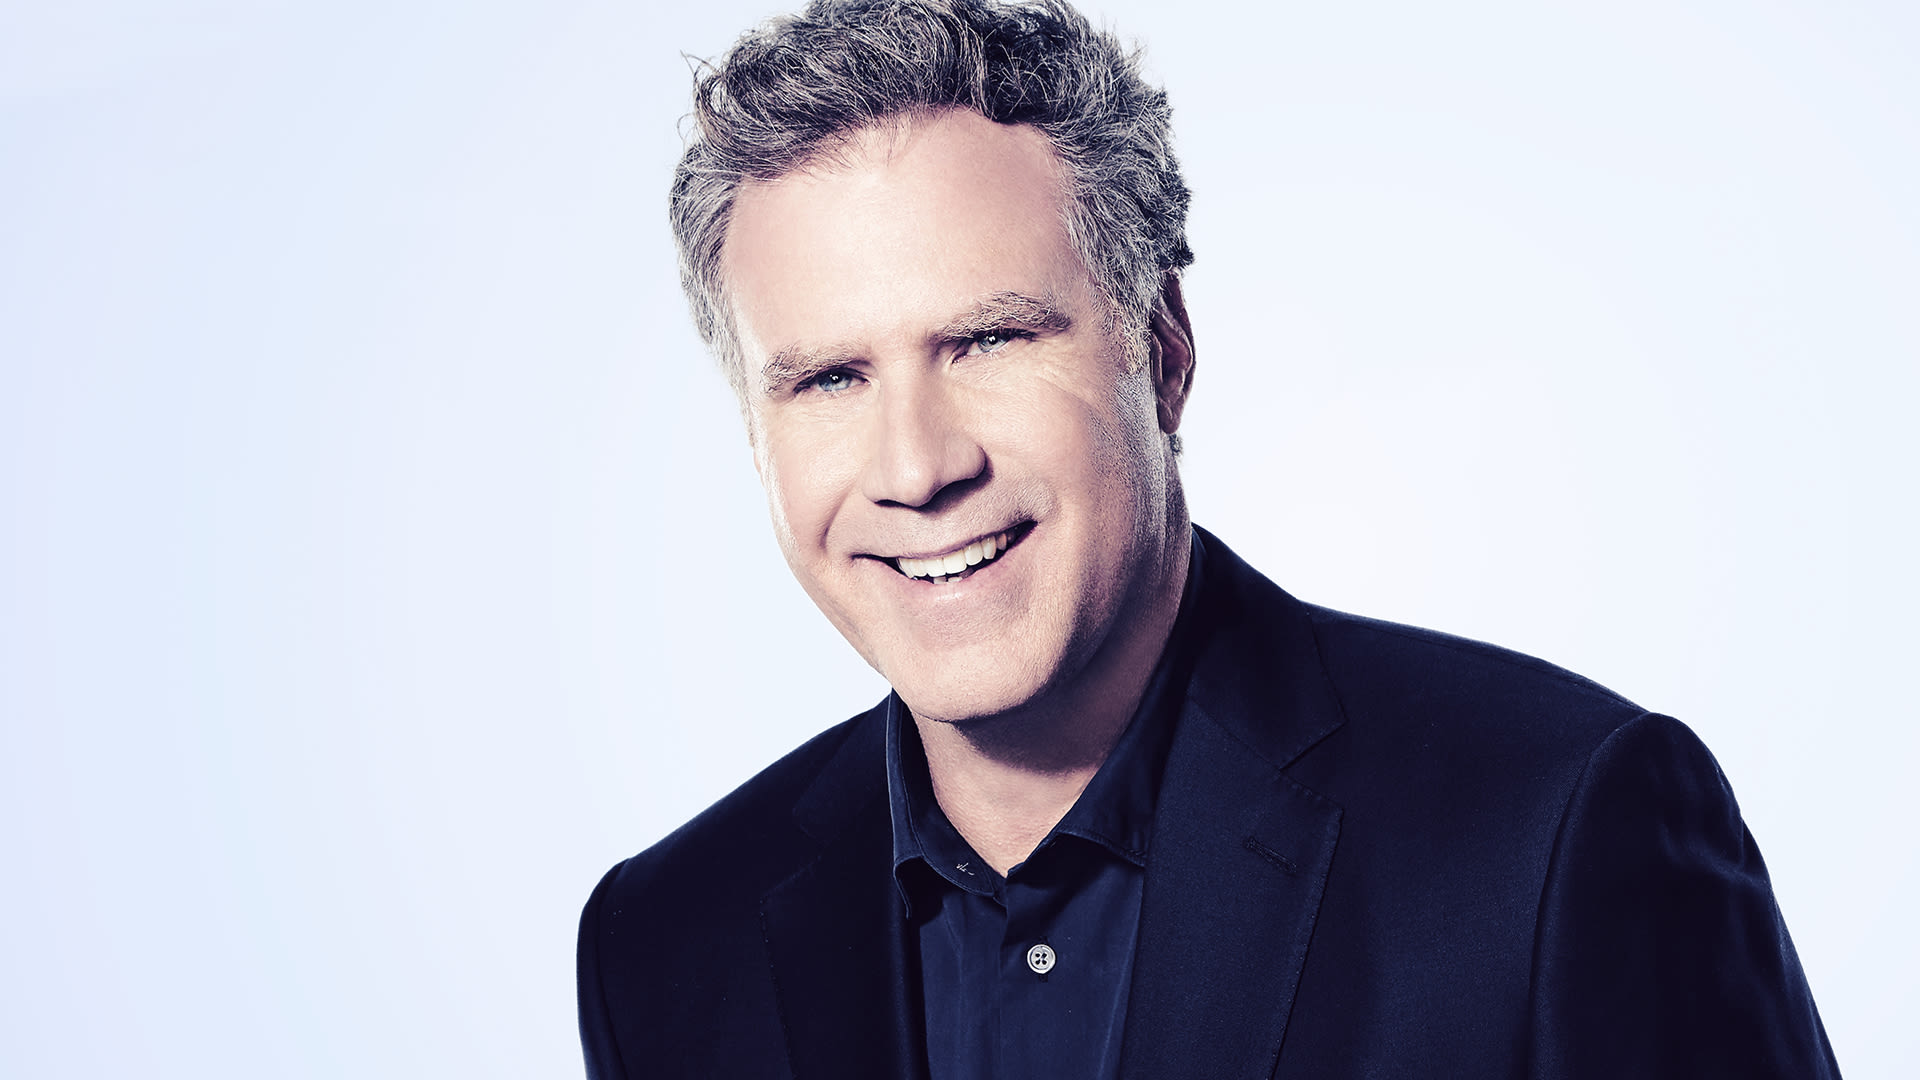 Will Ferrell To Create and Star in New Netflix Comedy Series About a Fictional Pro Golfer